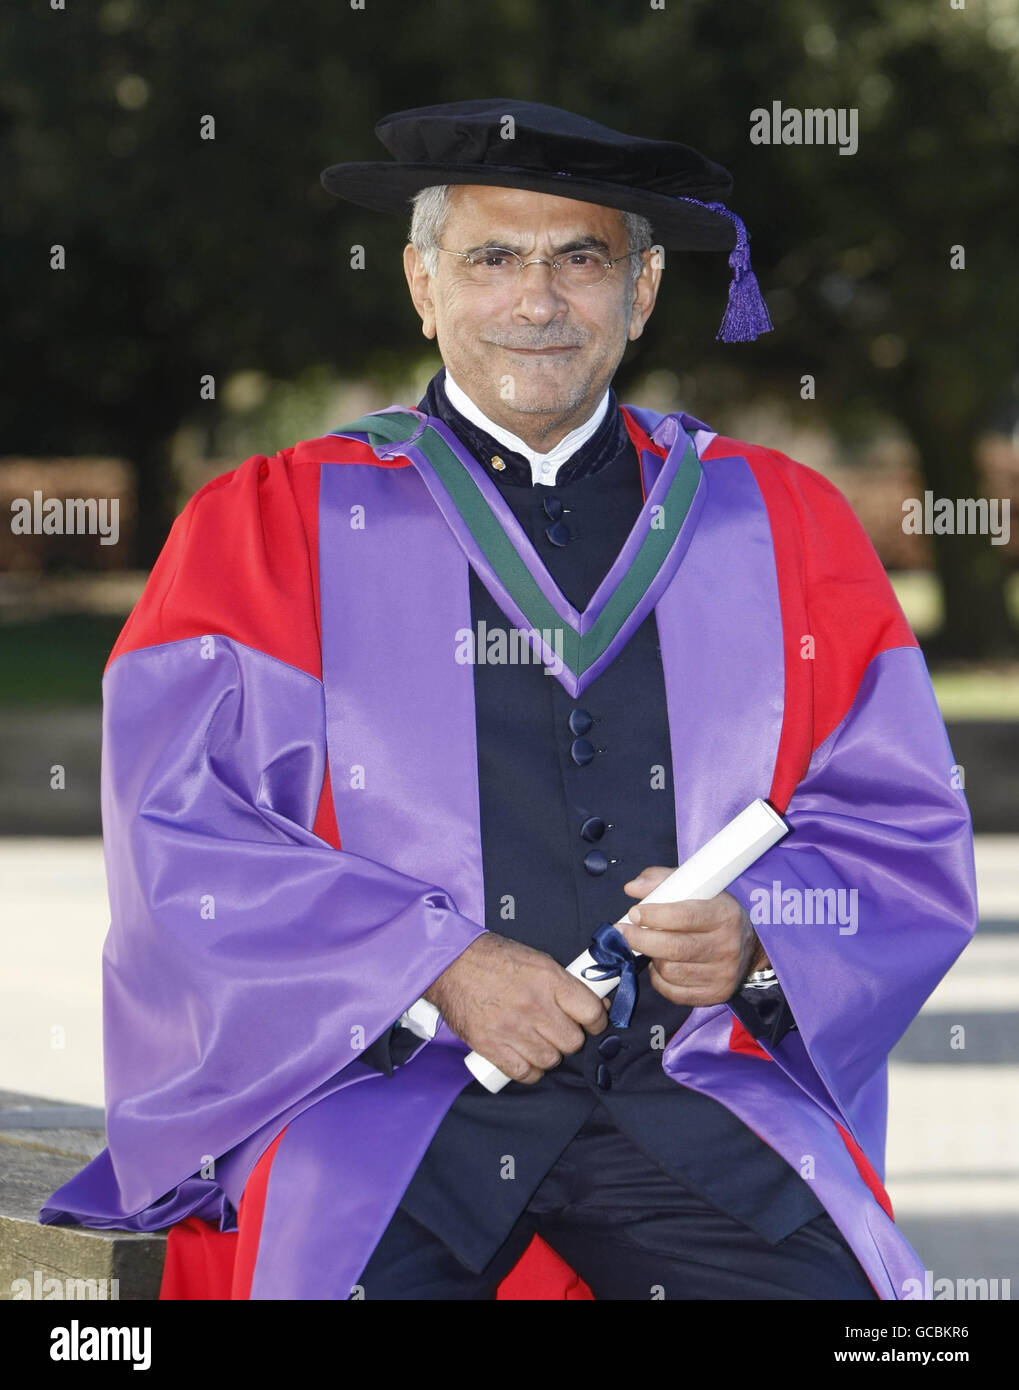 The President of the Democratic Republic of Timor-Leste, Dr Jose Ramos-Horta with his Honorary Doctorate of Laws, at the University College, Dublin. Stock Photo